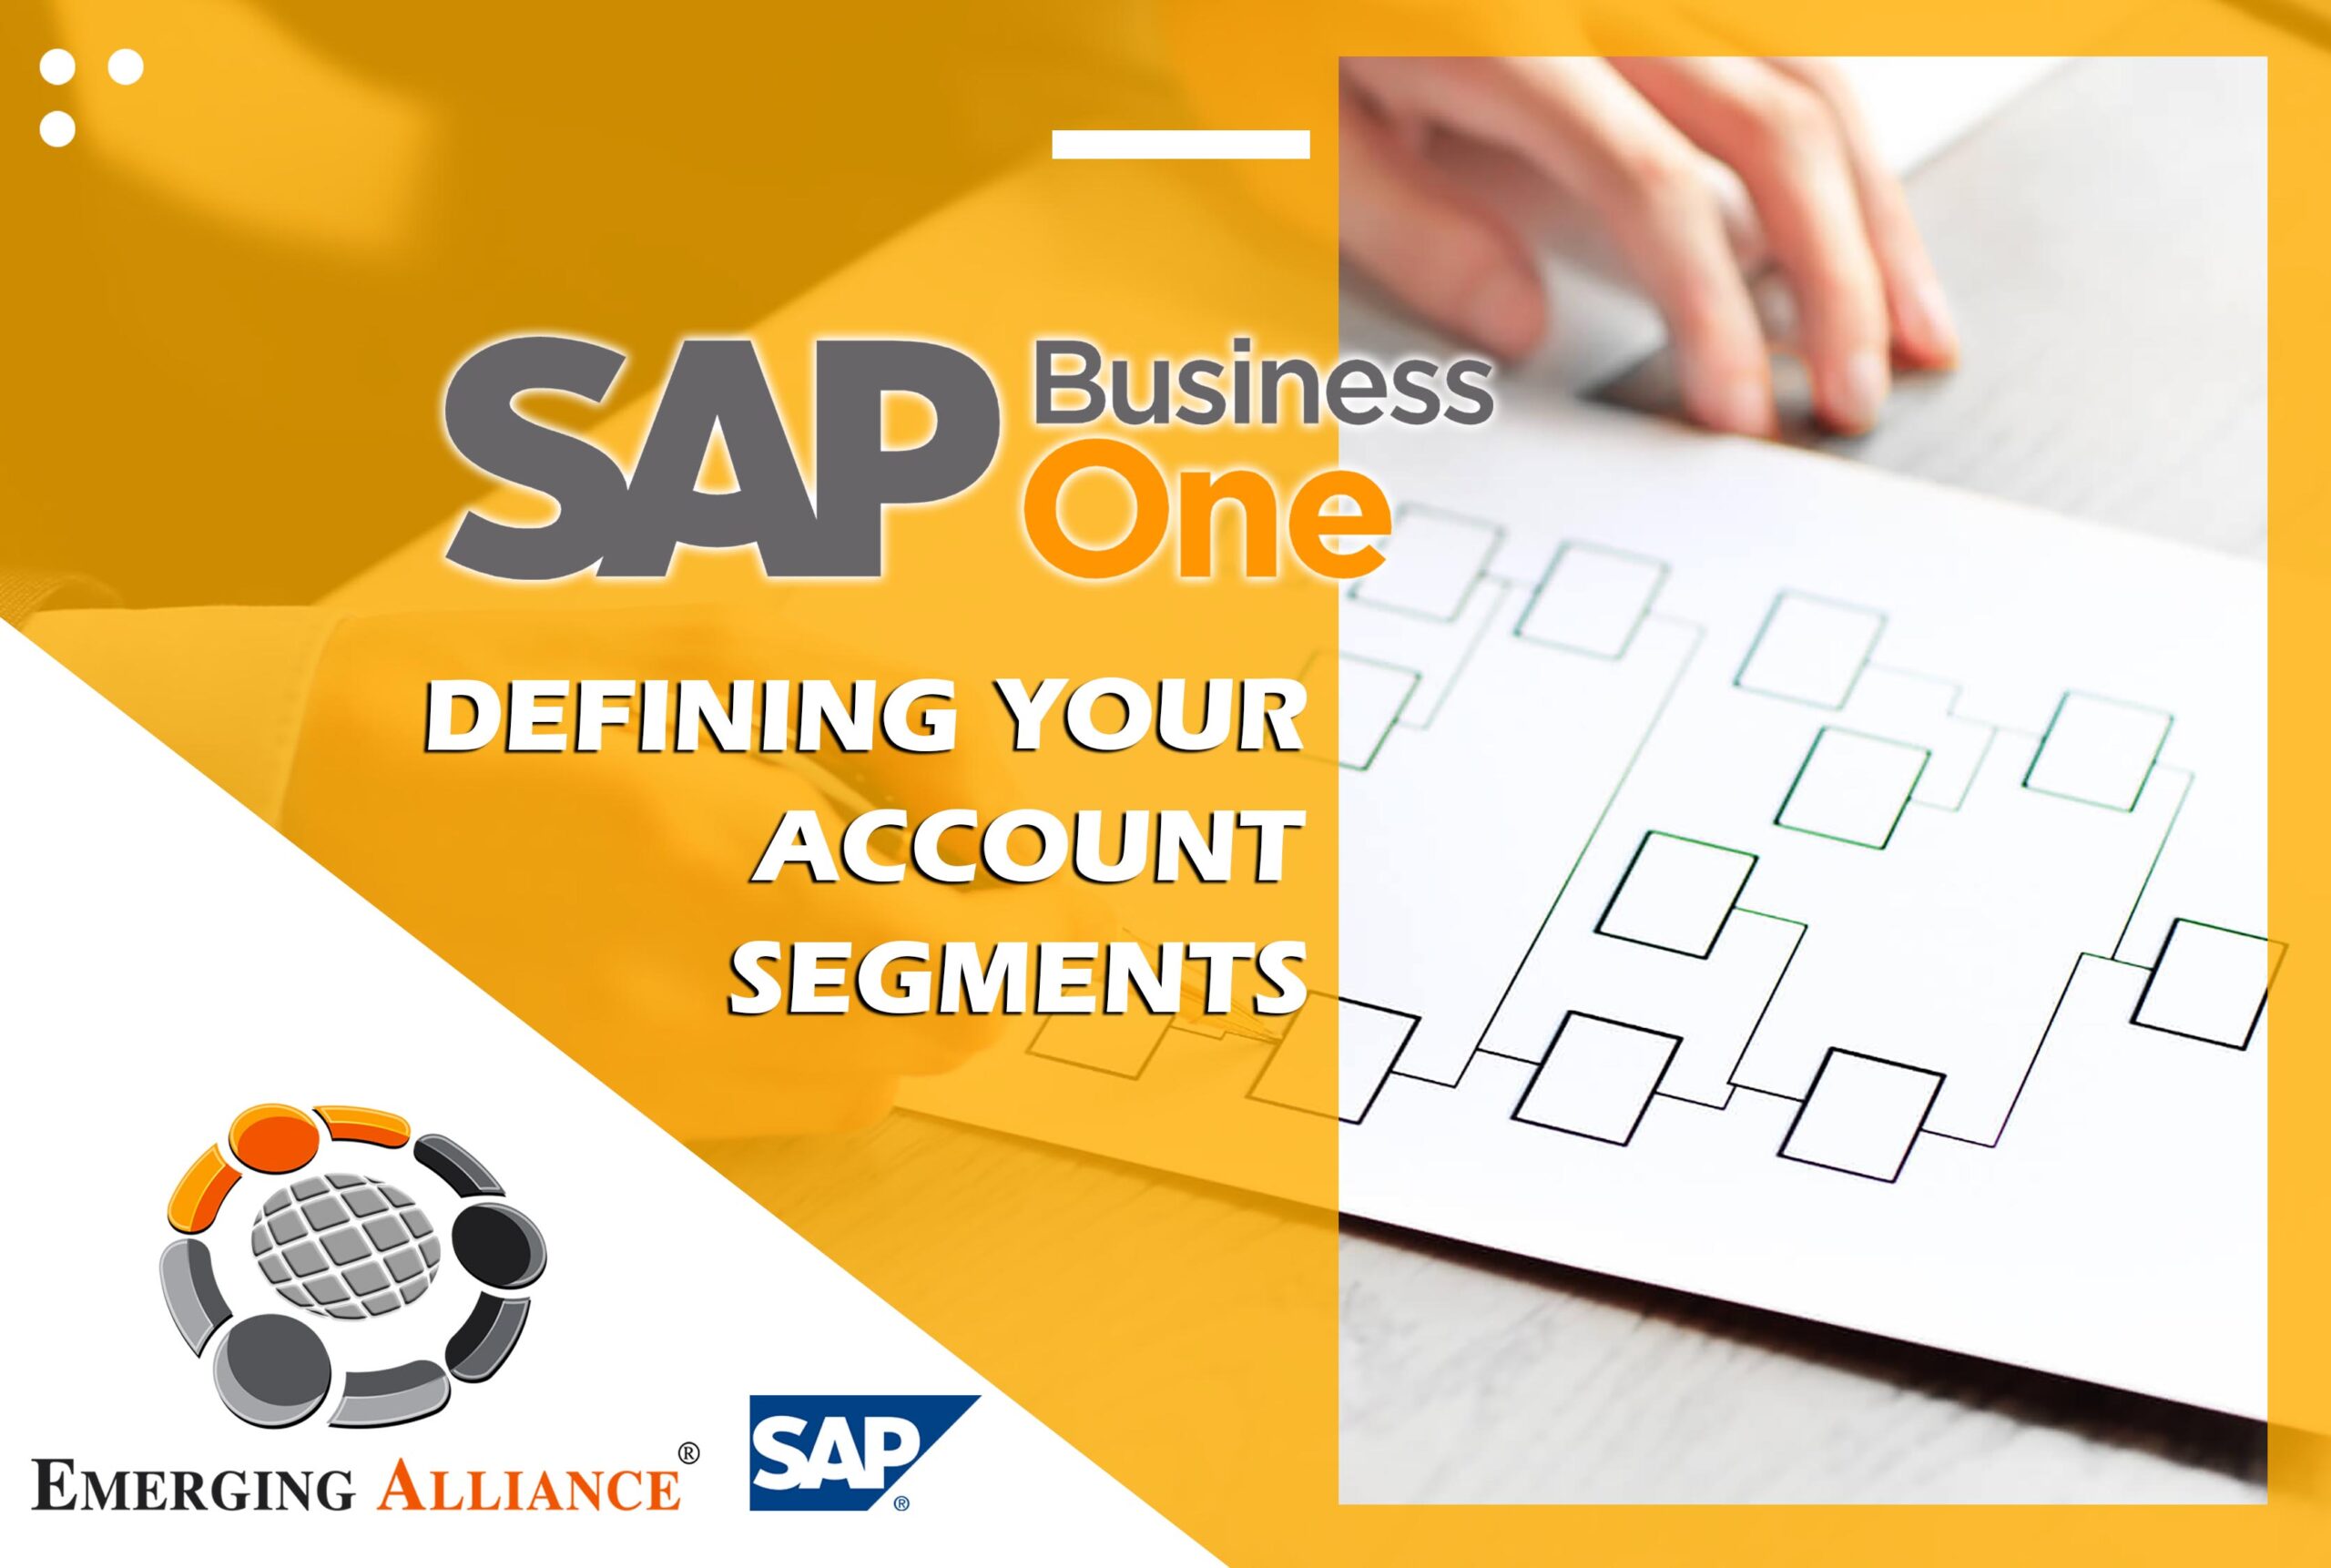 defining your account segments in SAP Business One